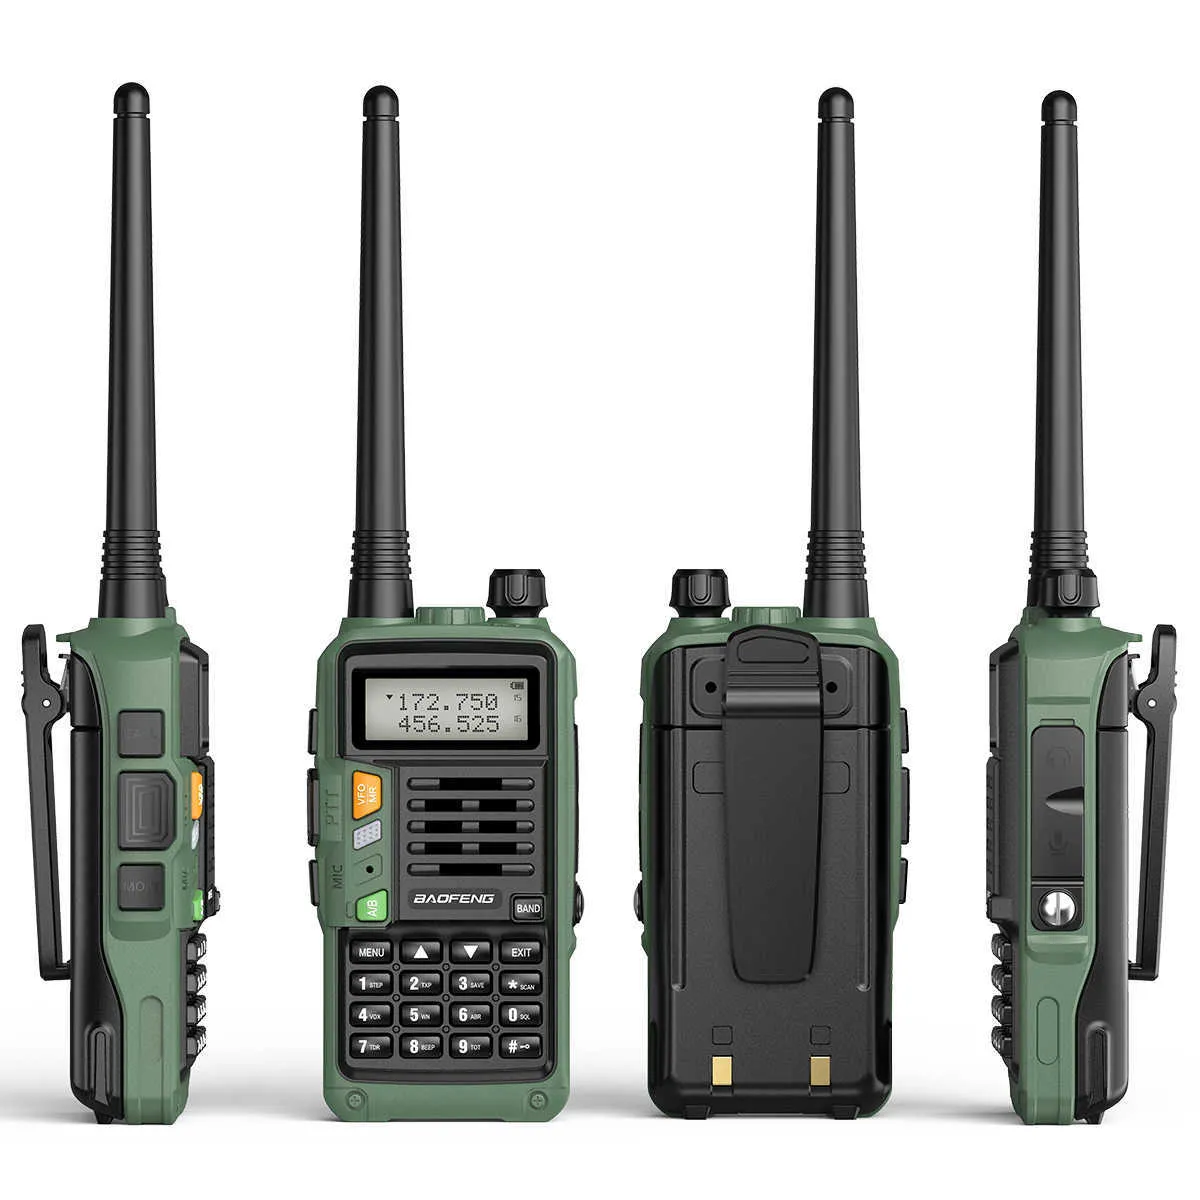 2021 NEW BaoFeng UV-S9 Plus Powerful Walkie Talkie CB Radio Transceiver 10W 50 KM Long Range Portable For hunt forest upgrade